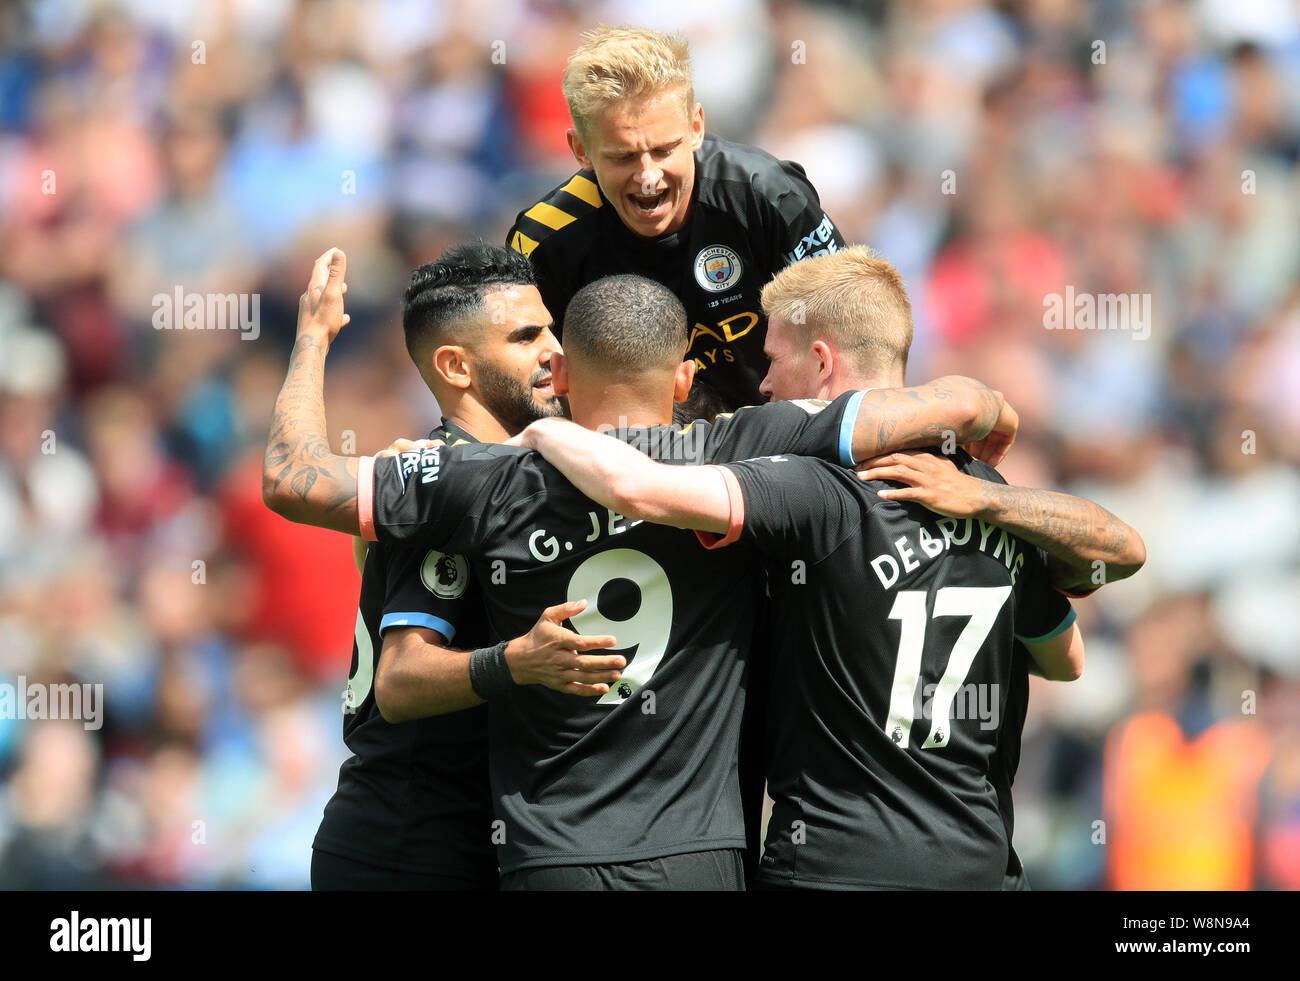 Manchester City players celebrate their third goal of the match before VAR check decides the goal is disallowed during the Premier League match at London Stadium. Stock Photo